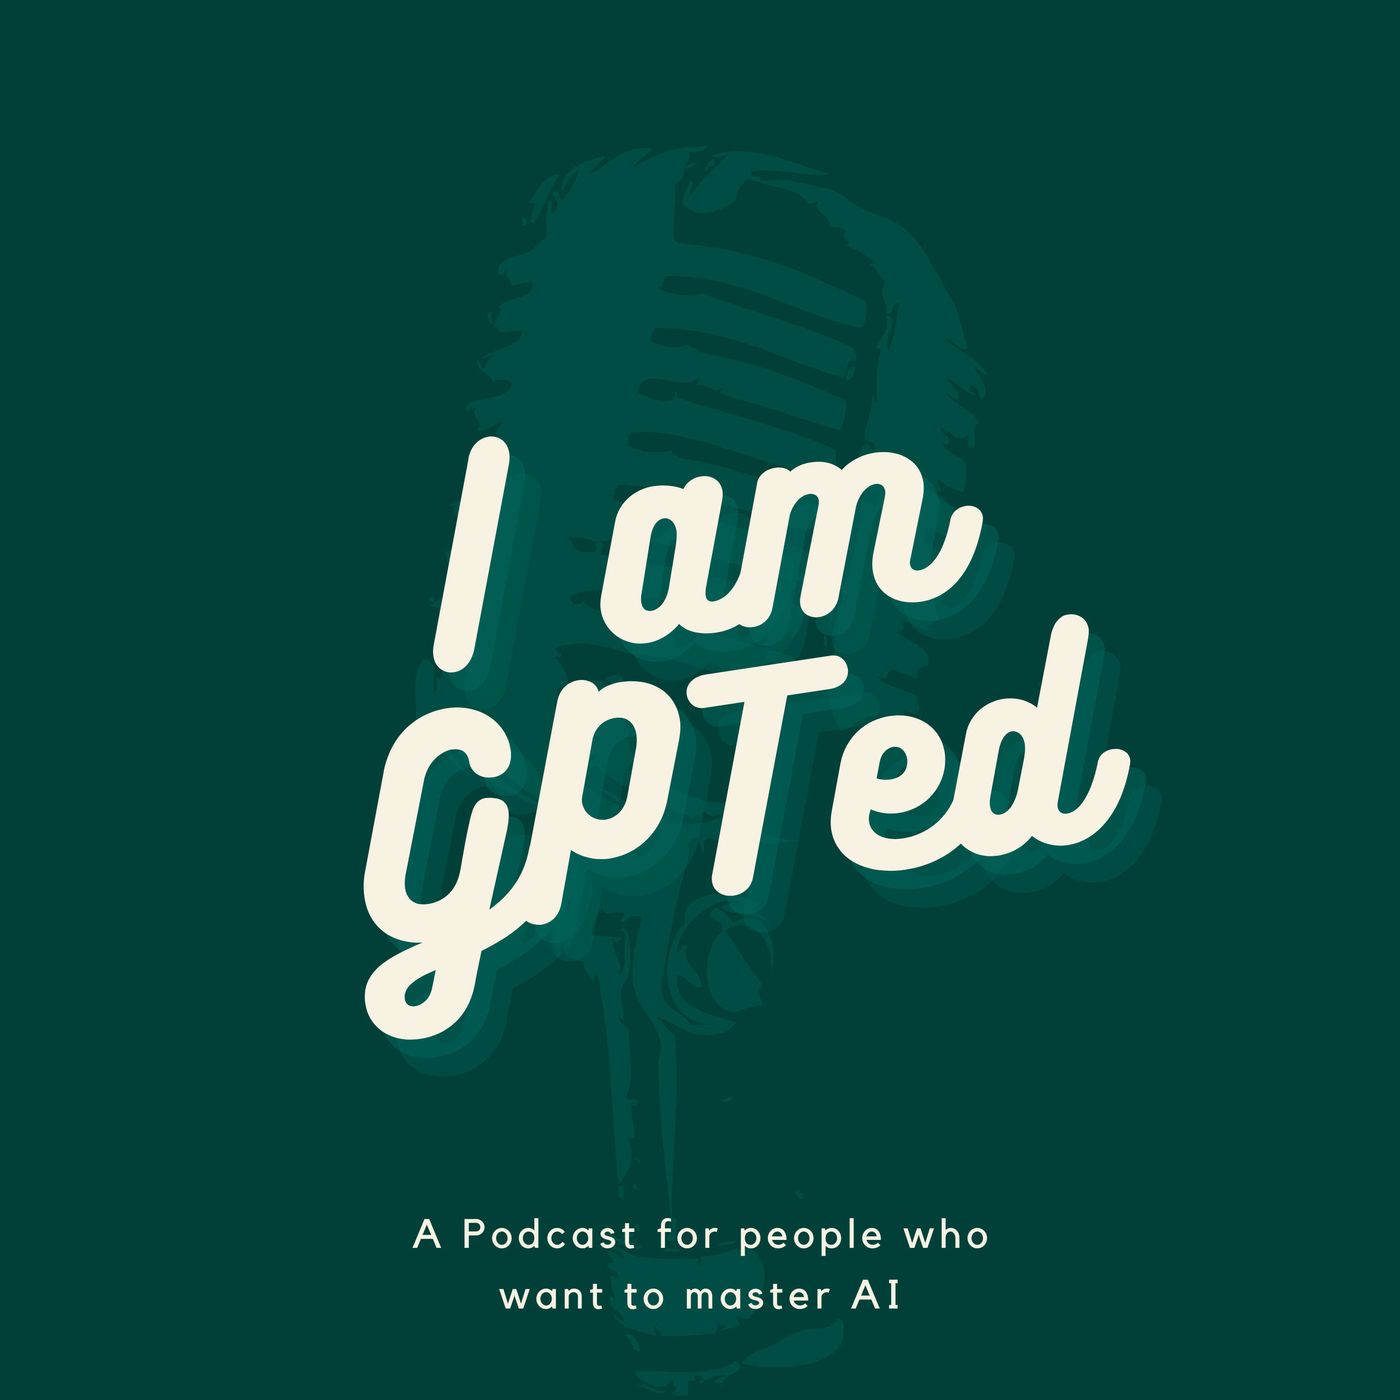 I am GPTed – what you need to know about Chat GPT, Bard, Llama, and Artificial Intelligence